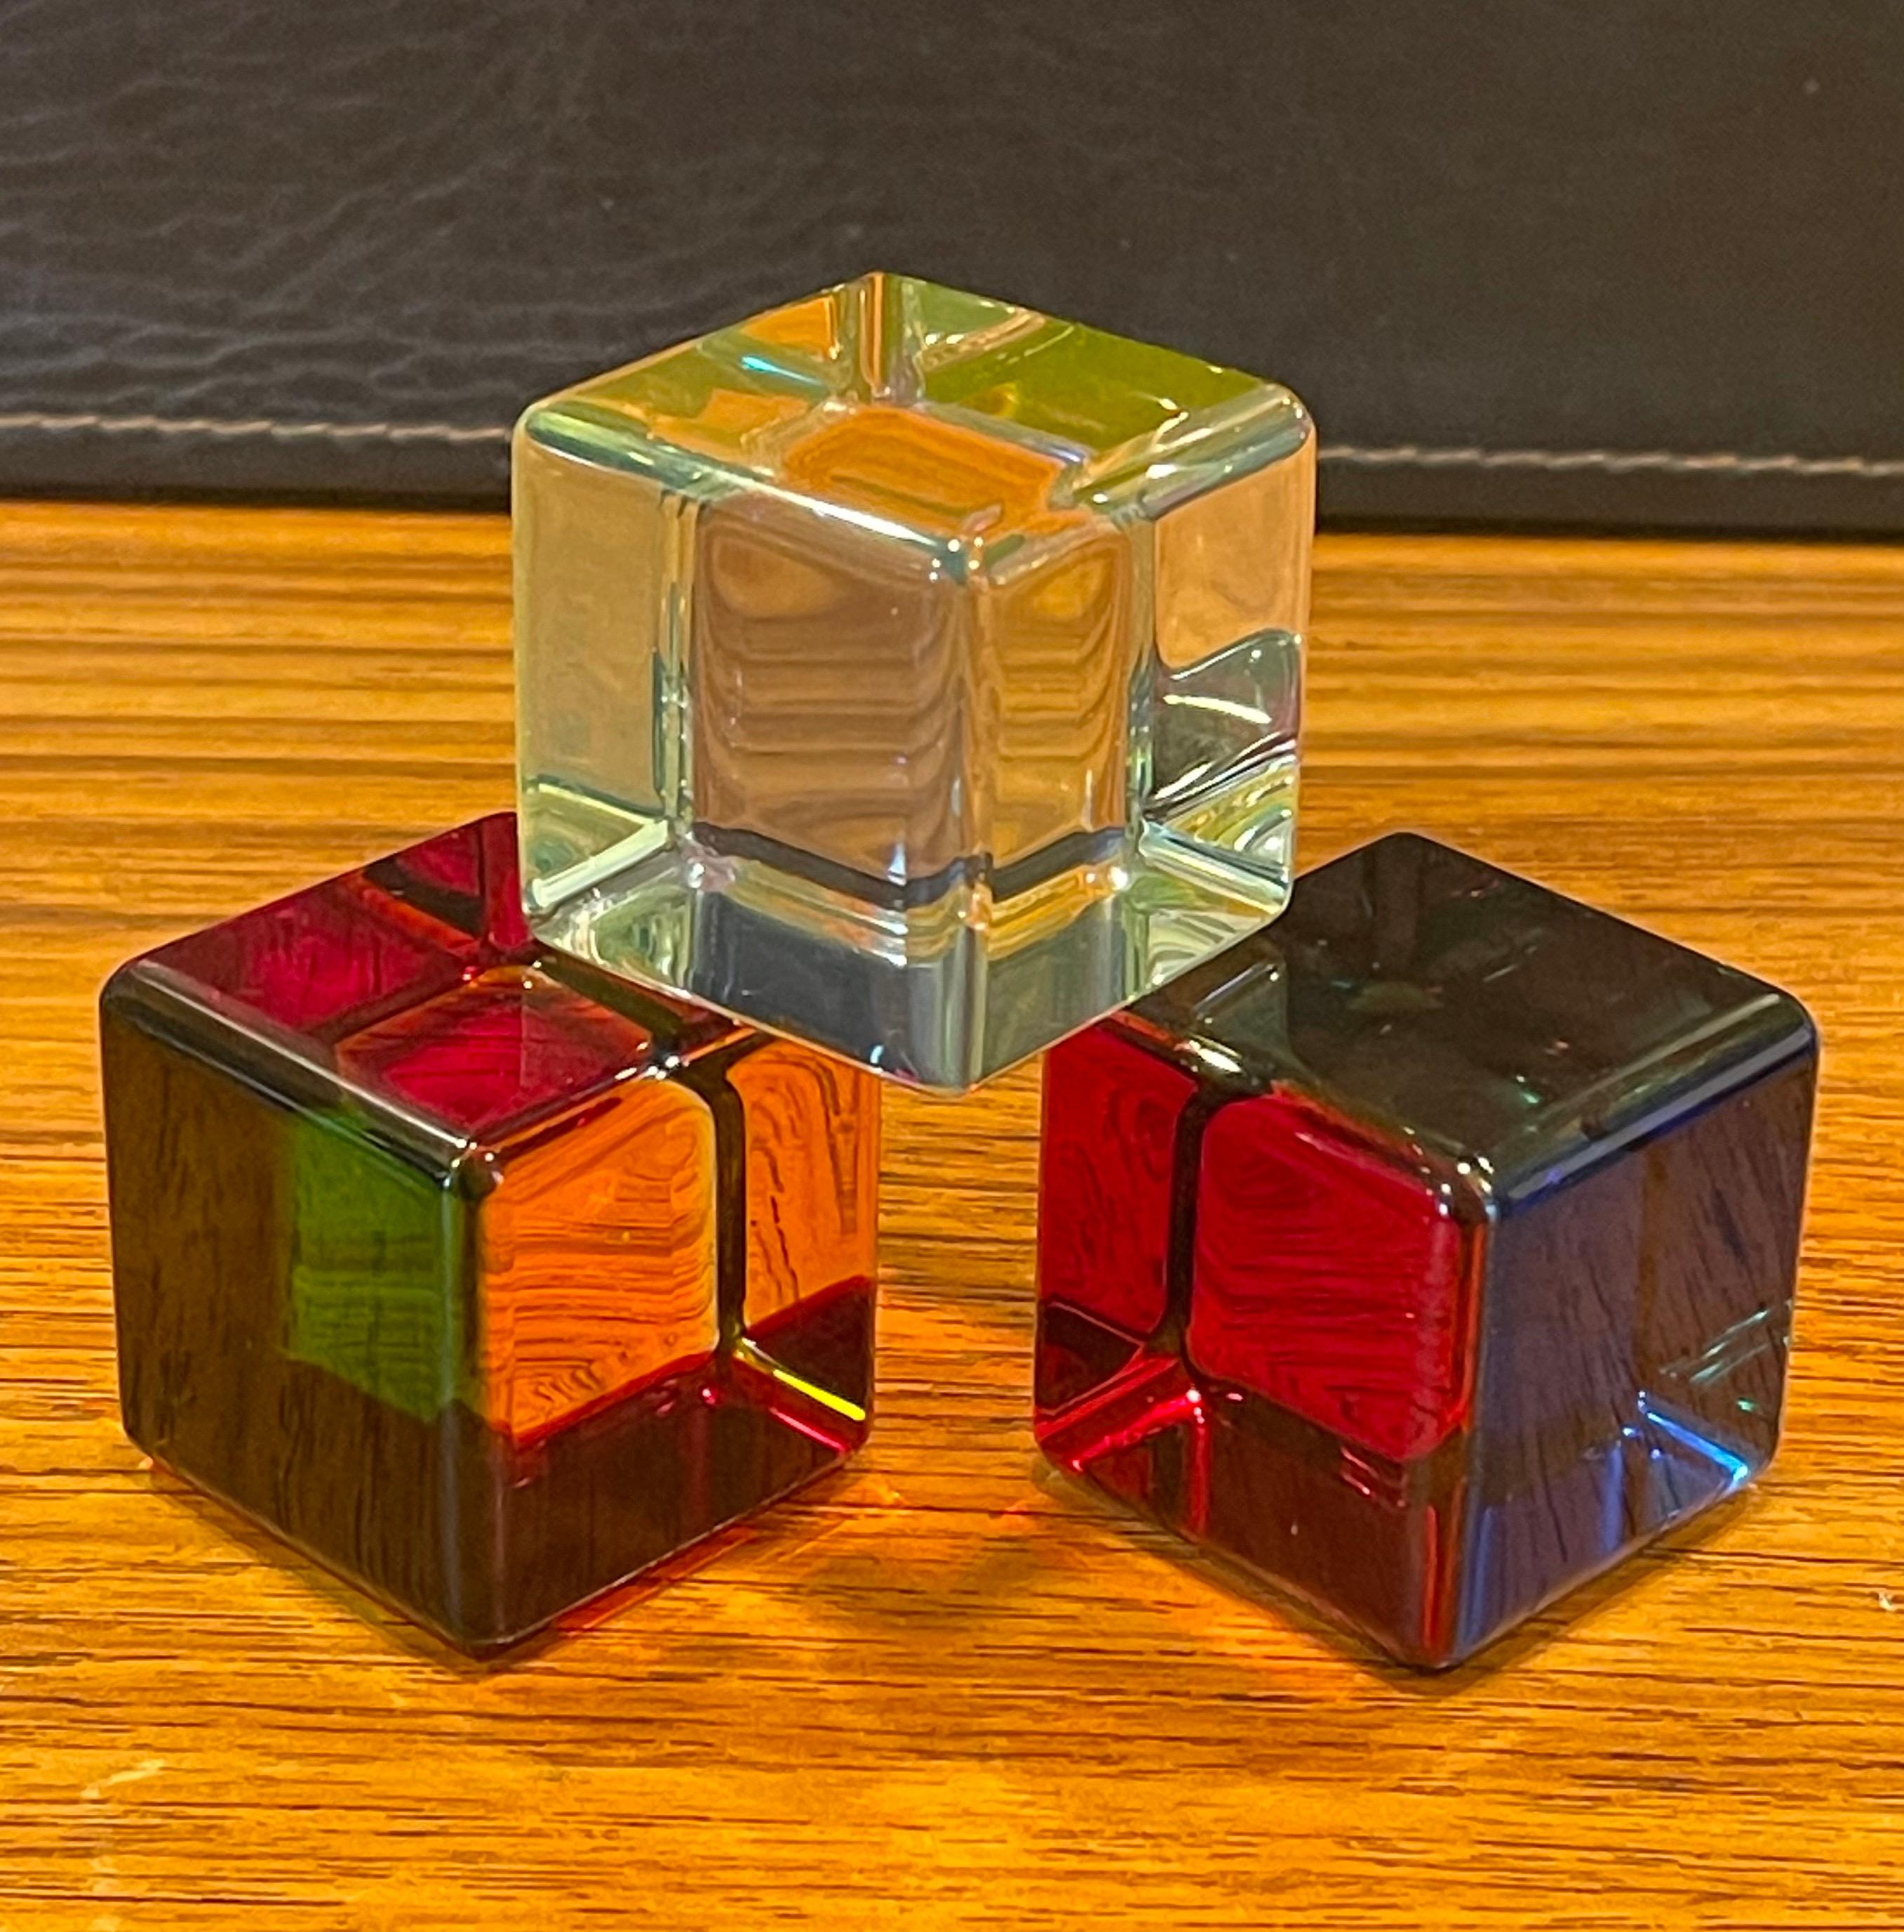 Nice set of three Op Art acrylic cube sculptures with original box (VM Ware) and brochure by Vasa Mihich, circa 2013. The look of each cube is changed by rotating the piece and letting the light refract at different angles; there are literally